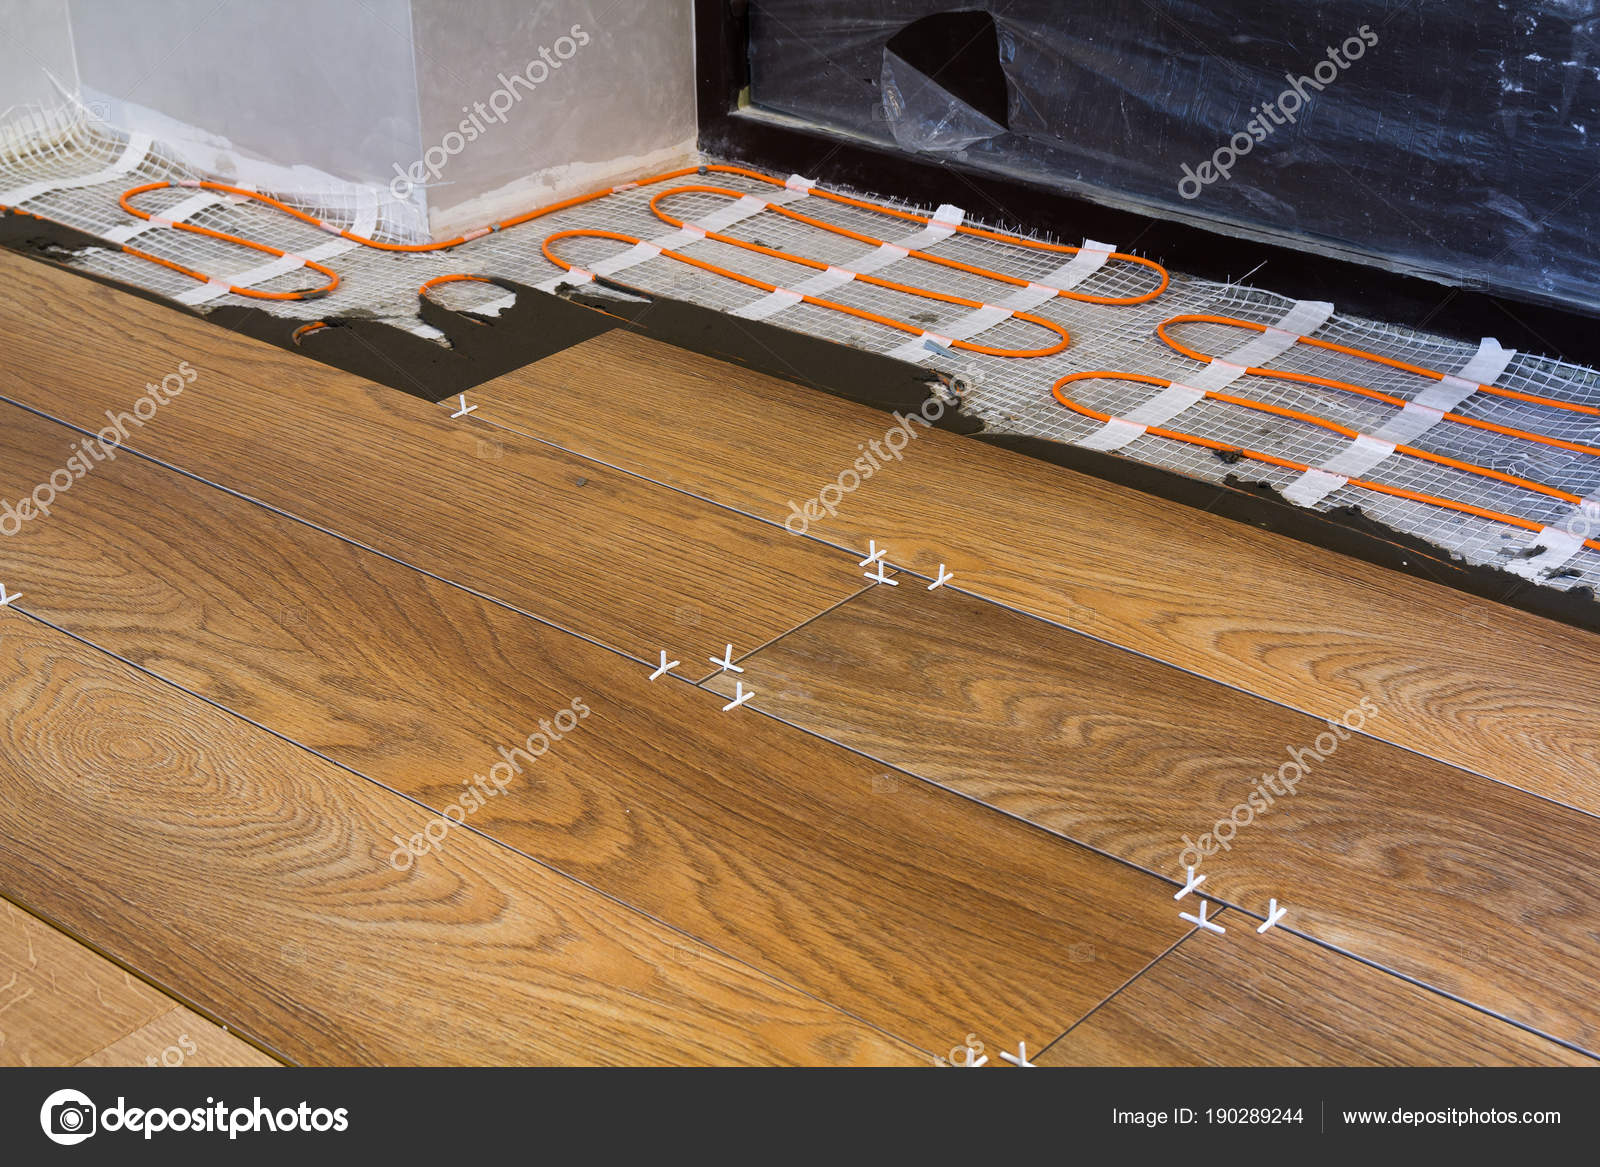 Installation Of Ceramic Tiles And Heating Elements In Warm Tile